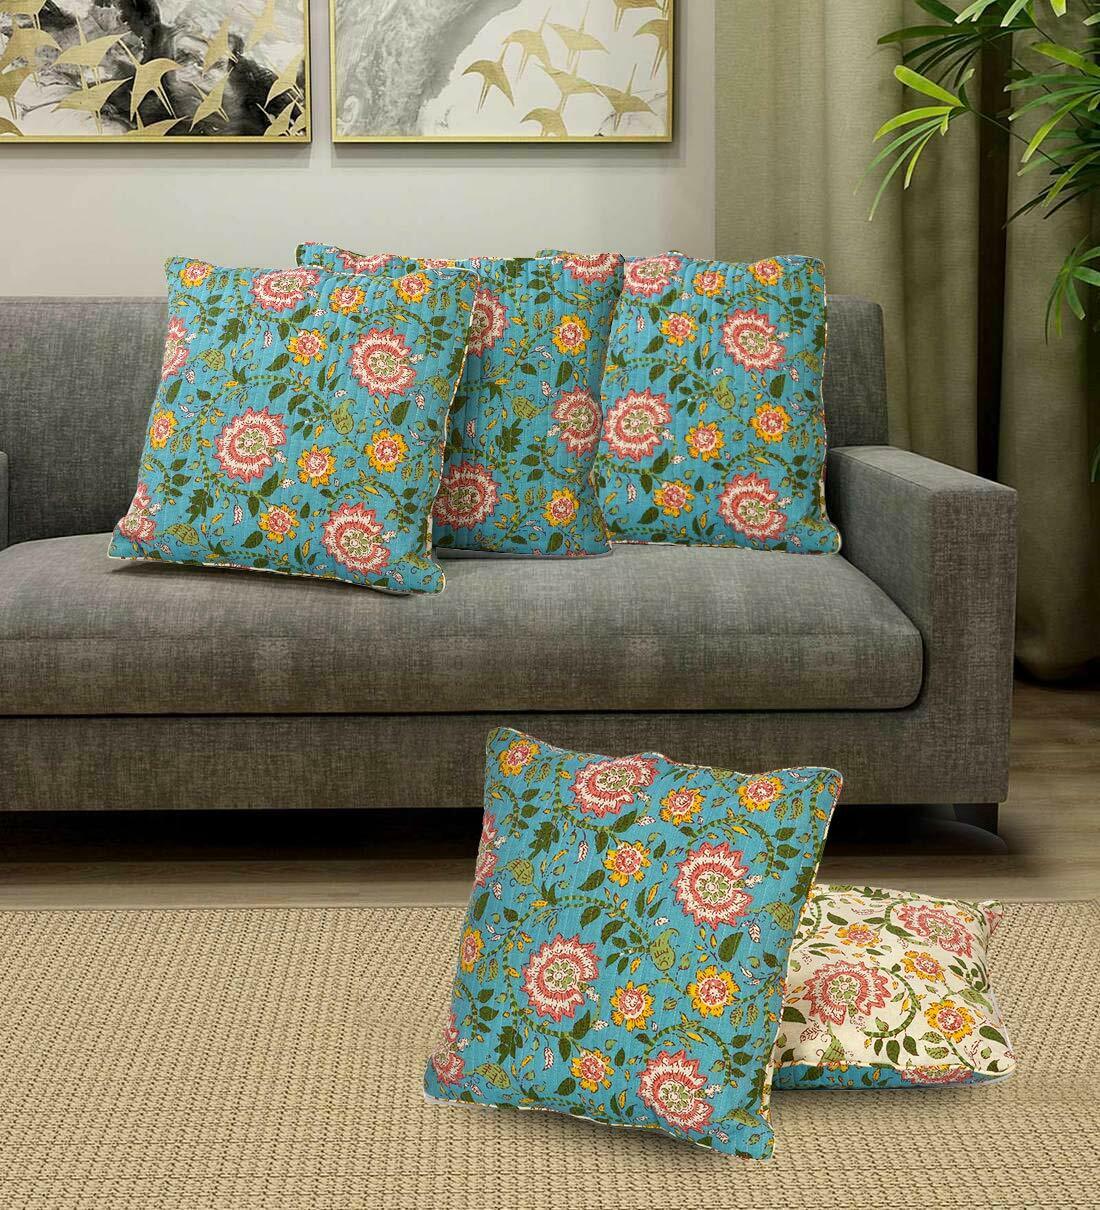 16 X 16 Inches, Pack Of 5 Pcs Floral Printed Green Cushion Cover Set Of Cotton